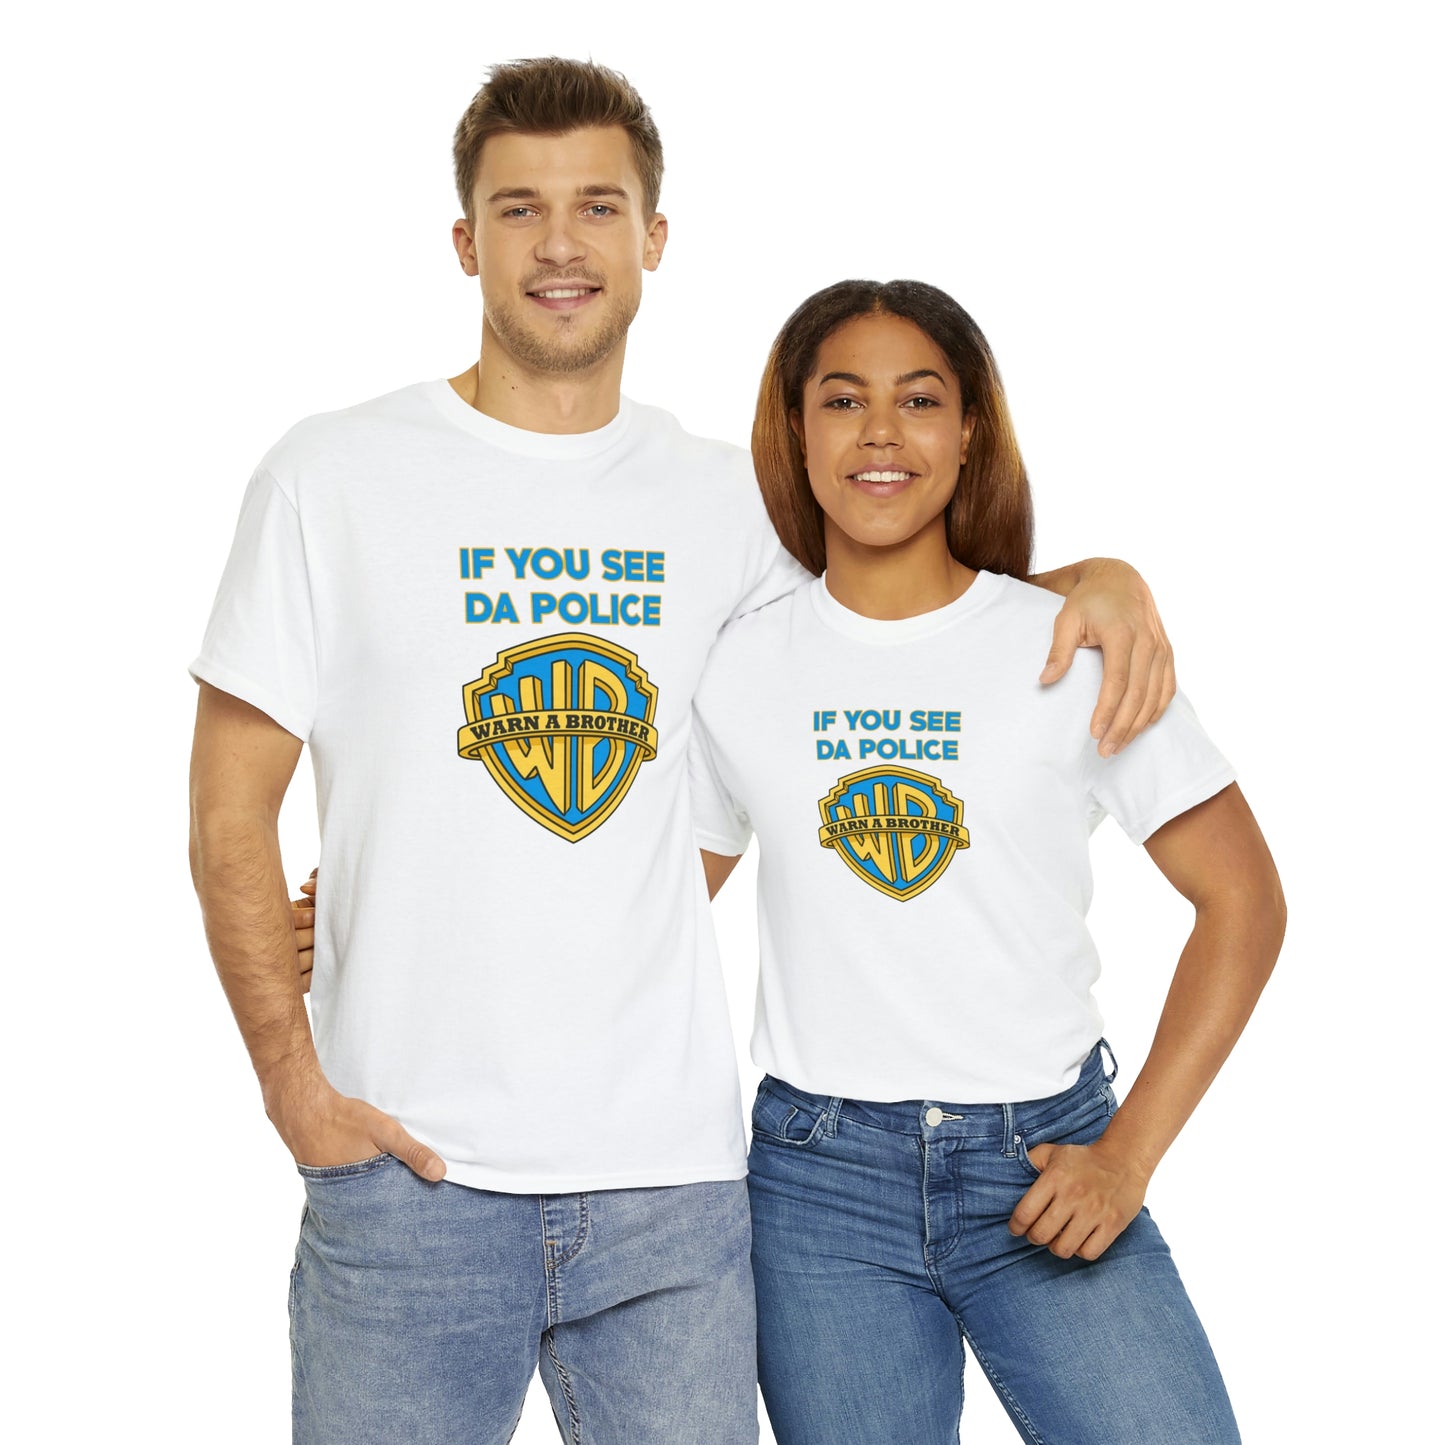 WARN A BROTHER T-SHIRT